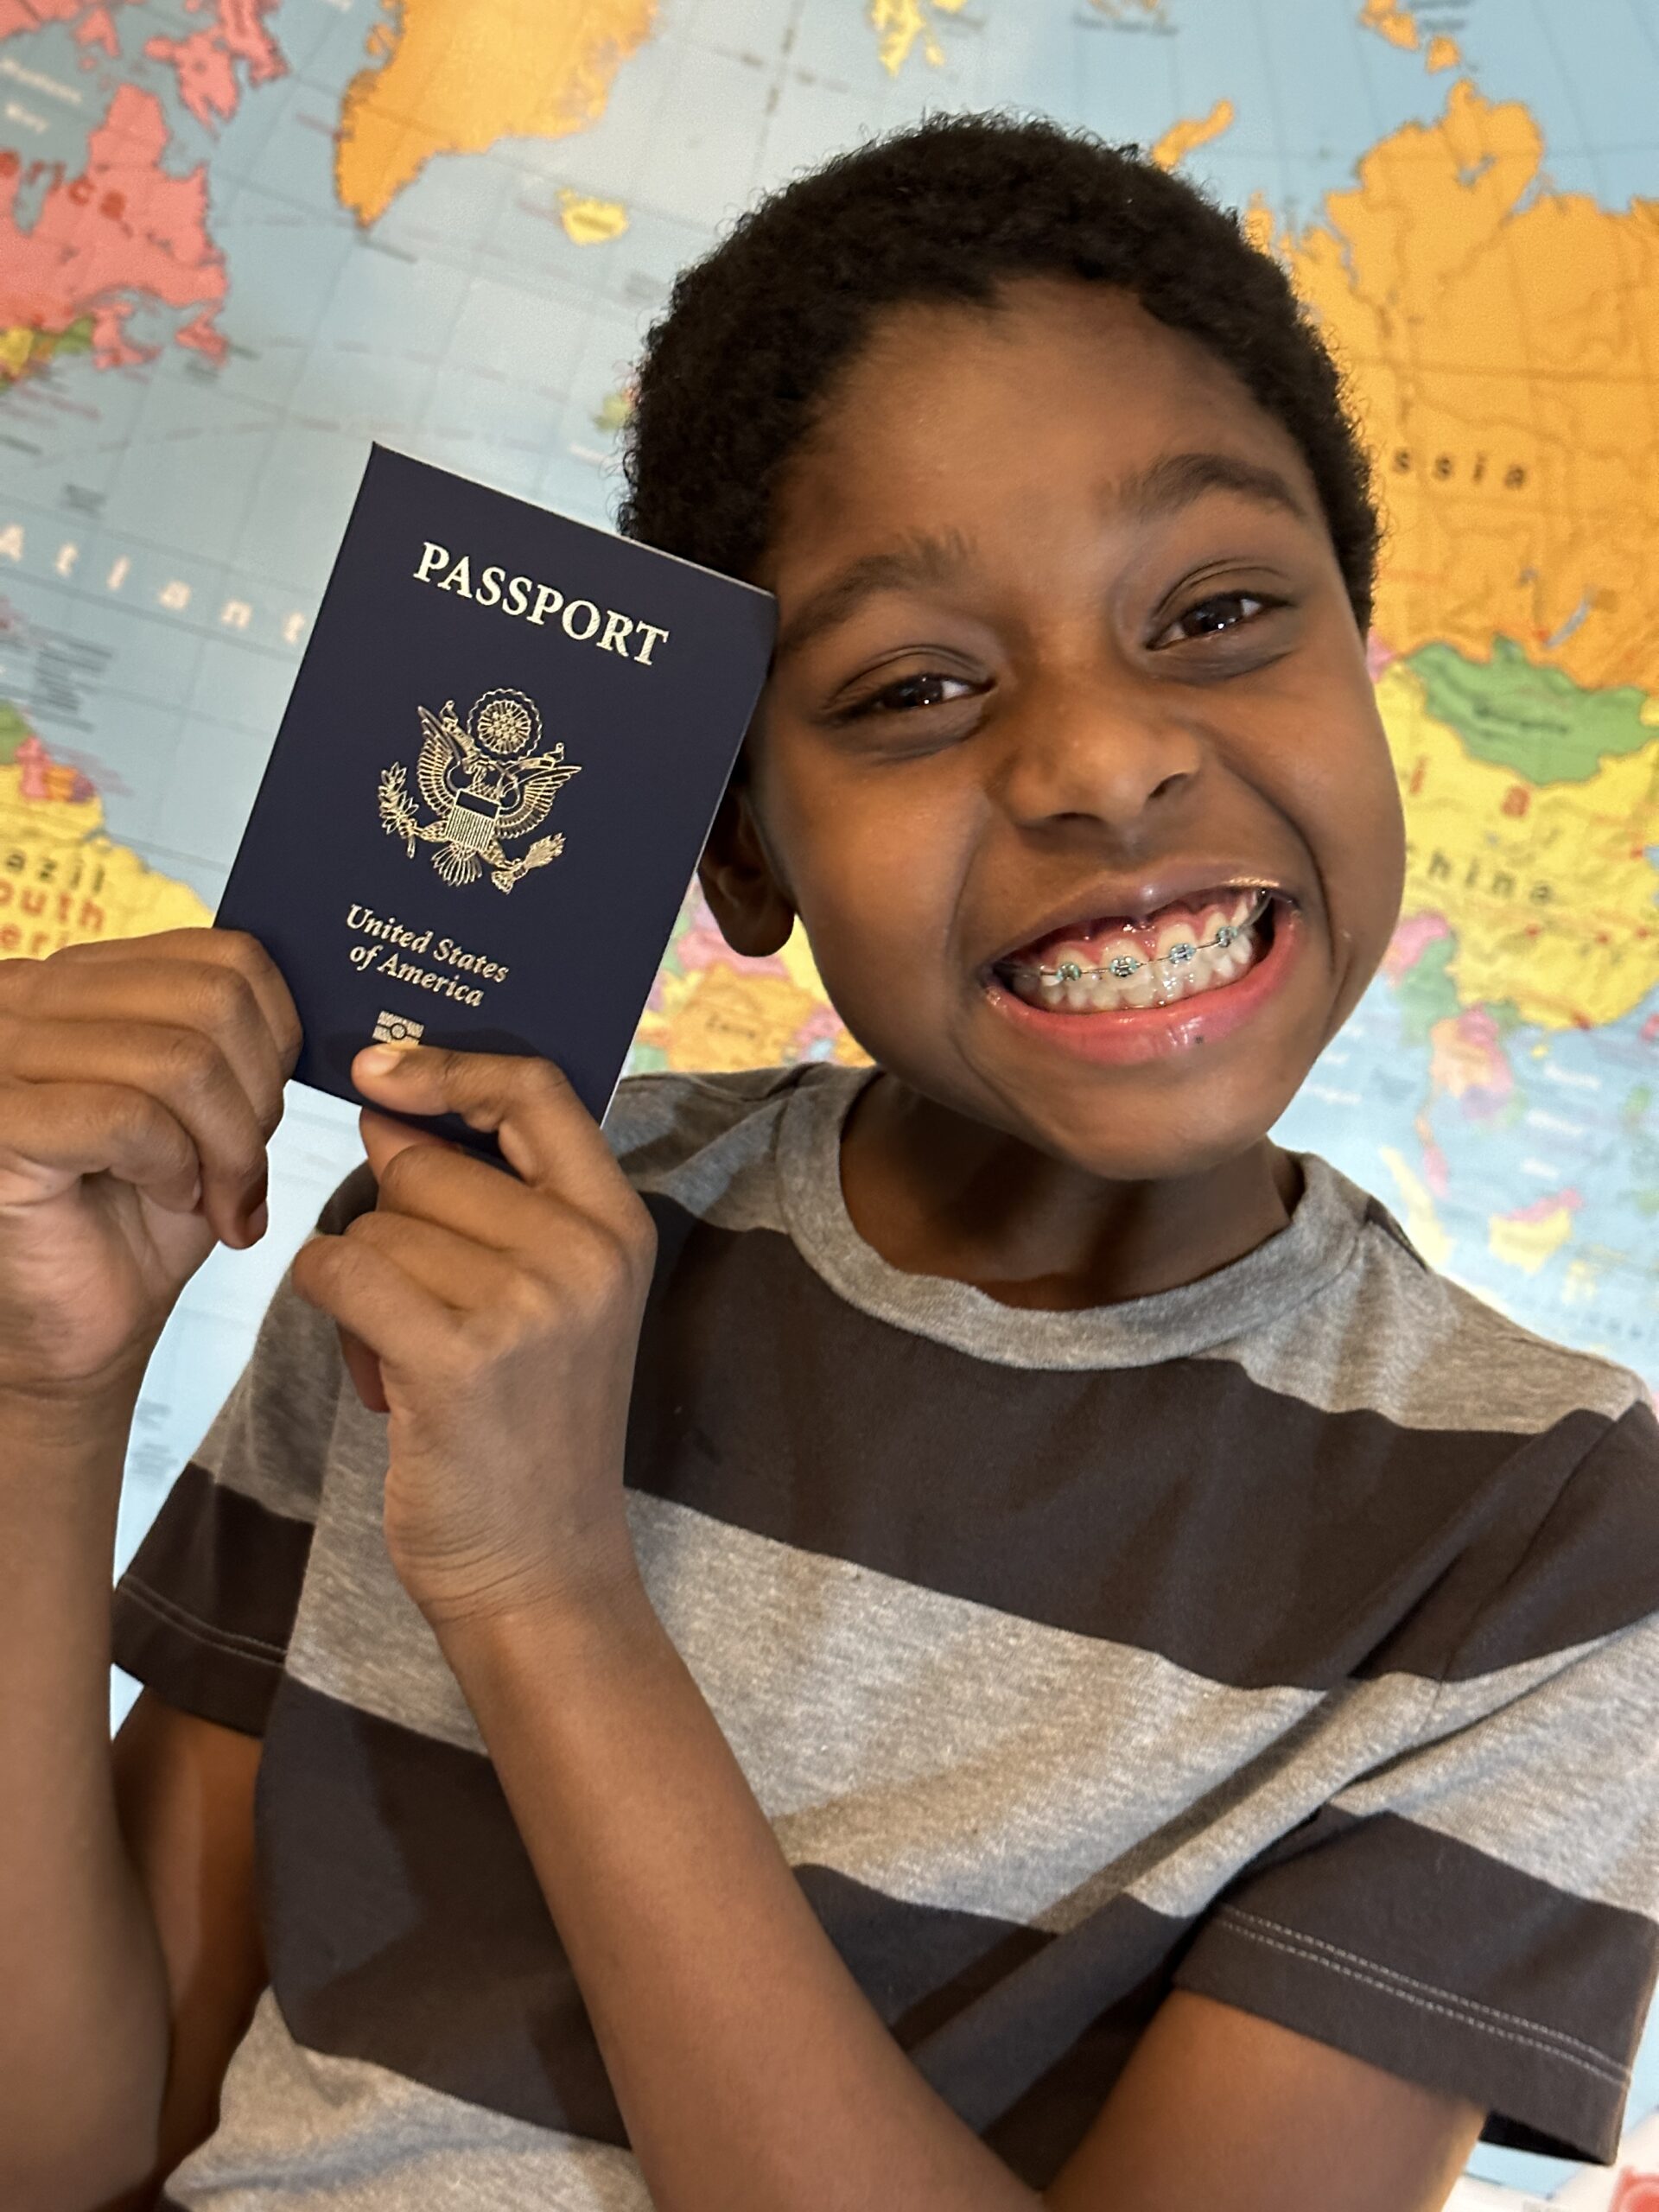 how much is a passport for kids